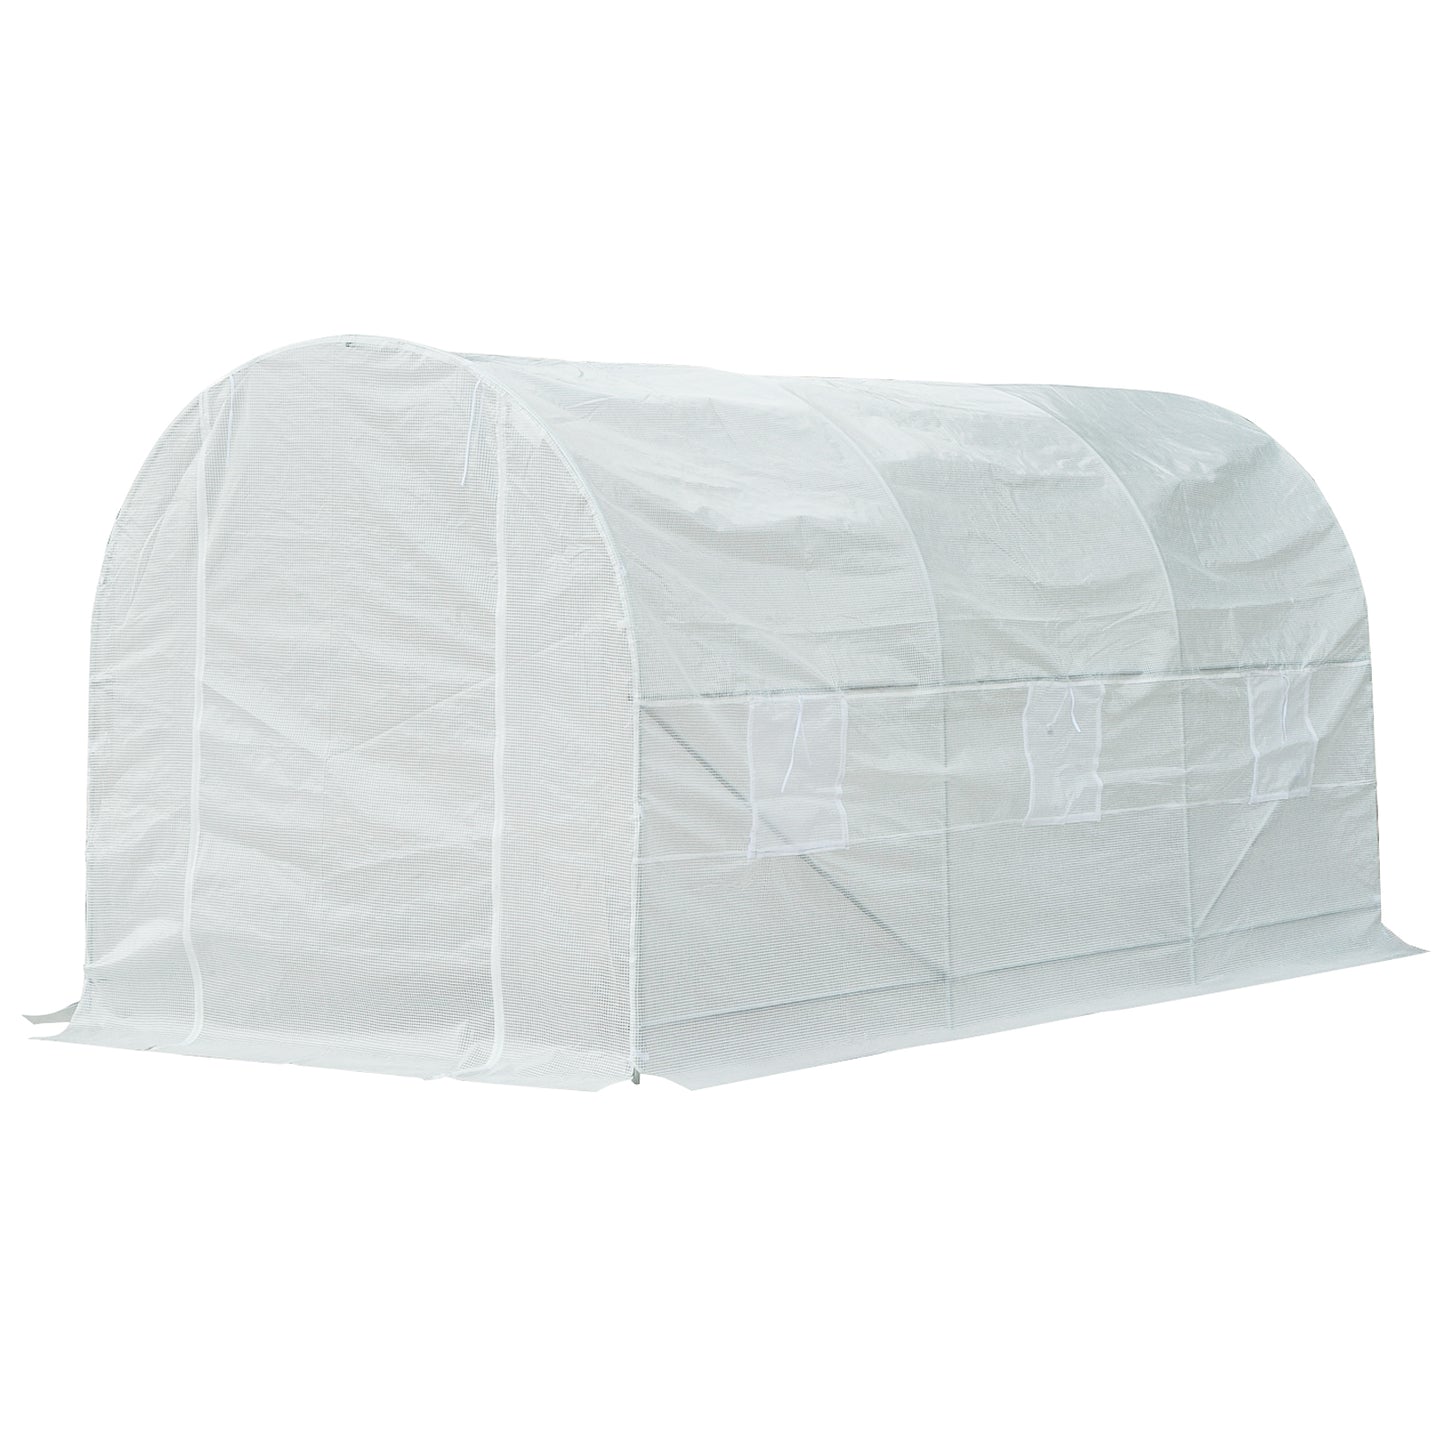 Outsunny 4.5Lx2Wx2H m Walk-in Greenhouse-White